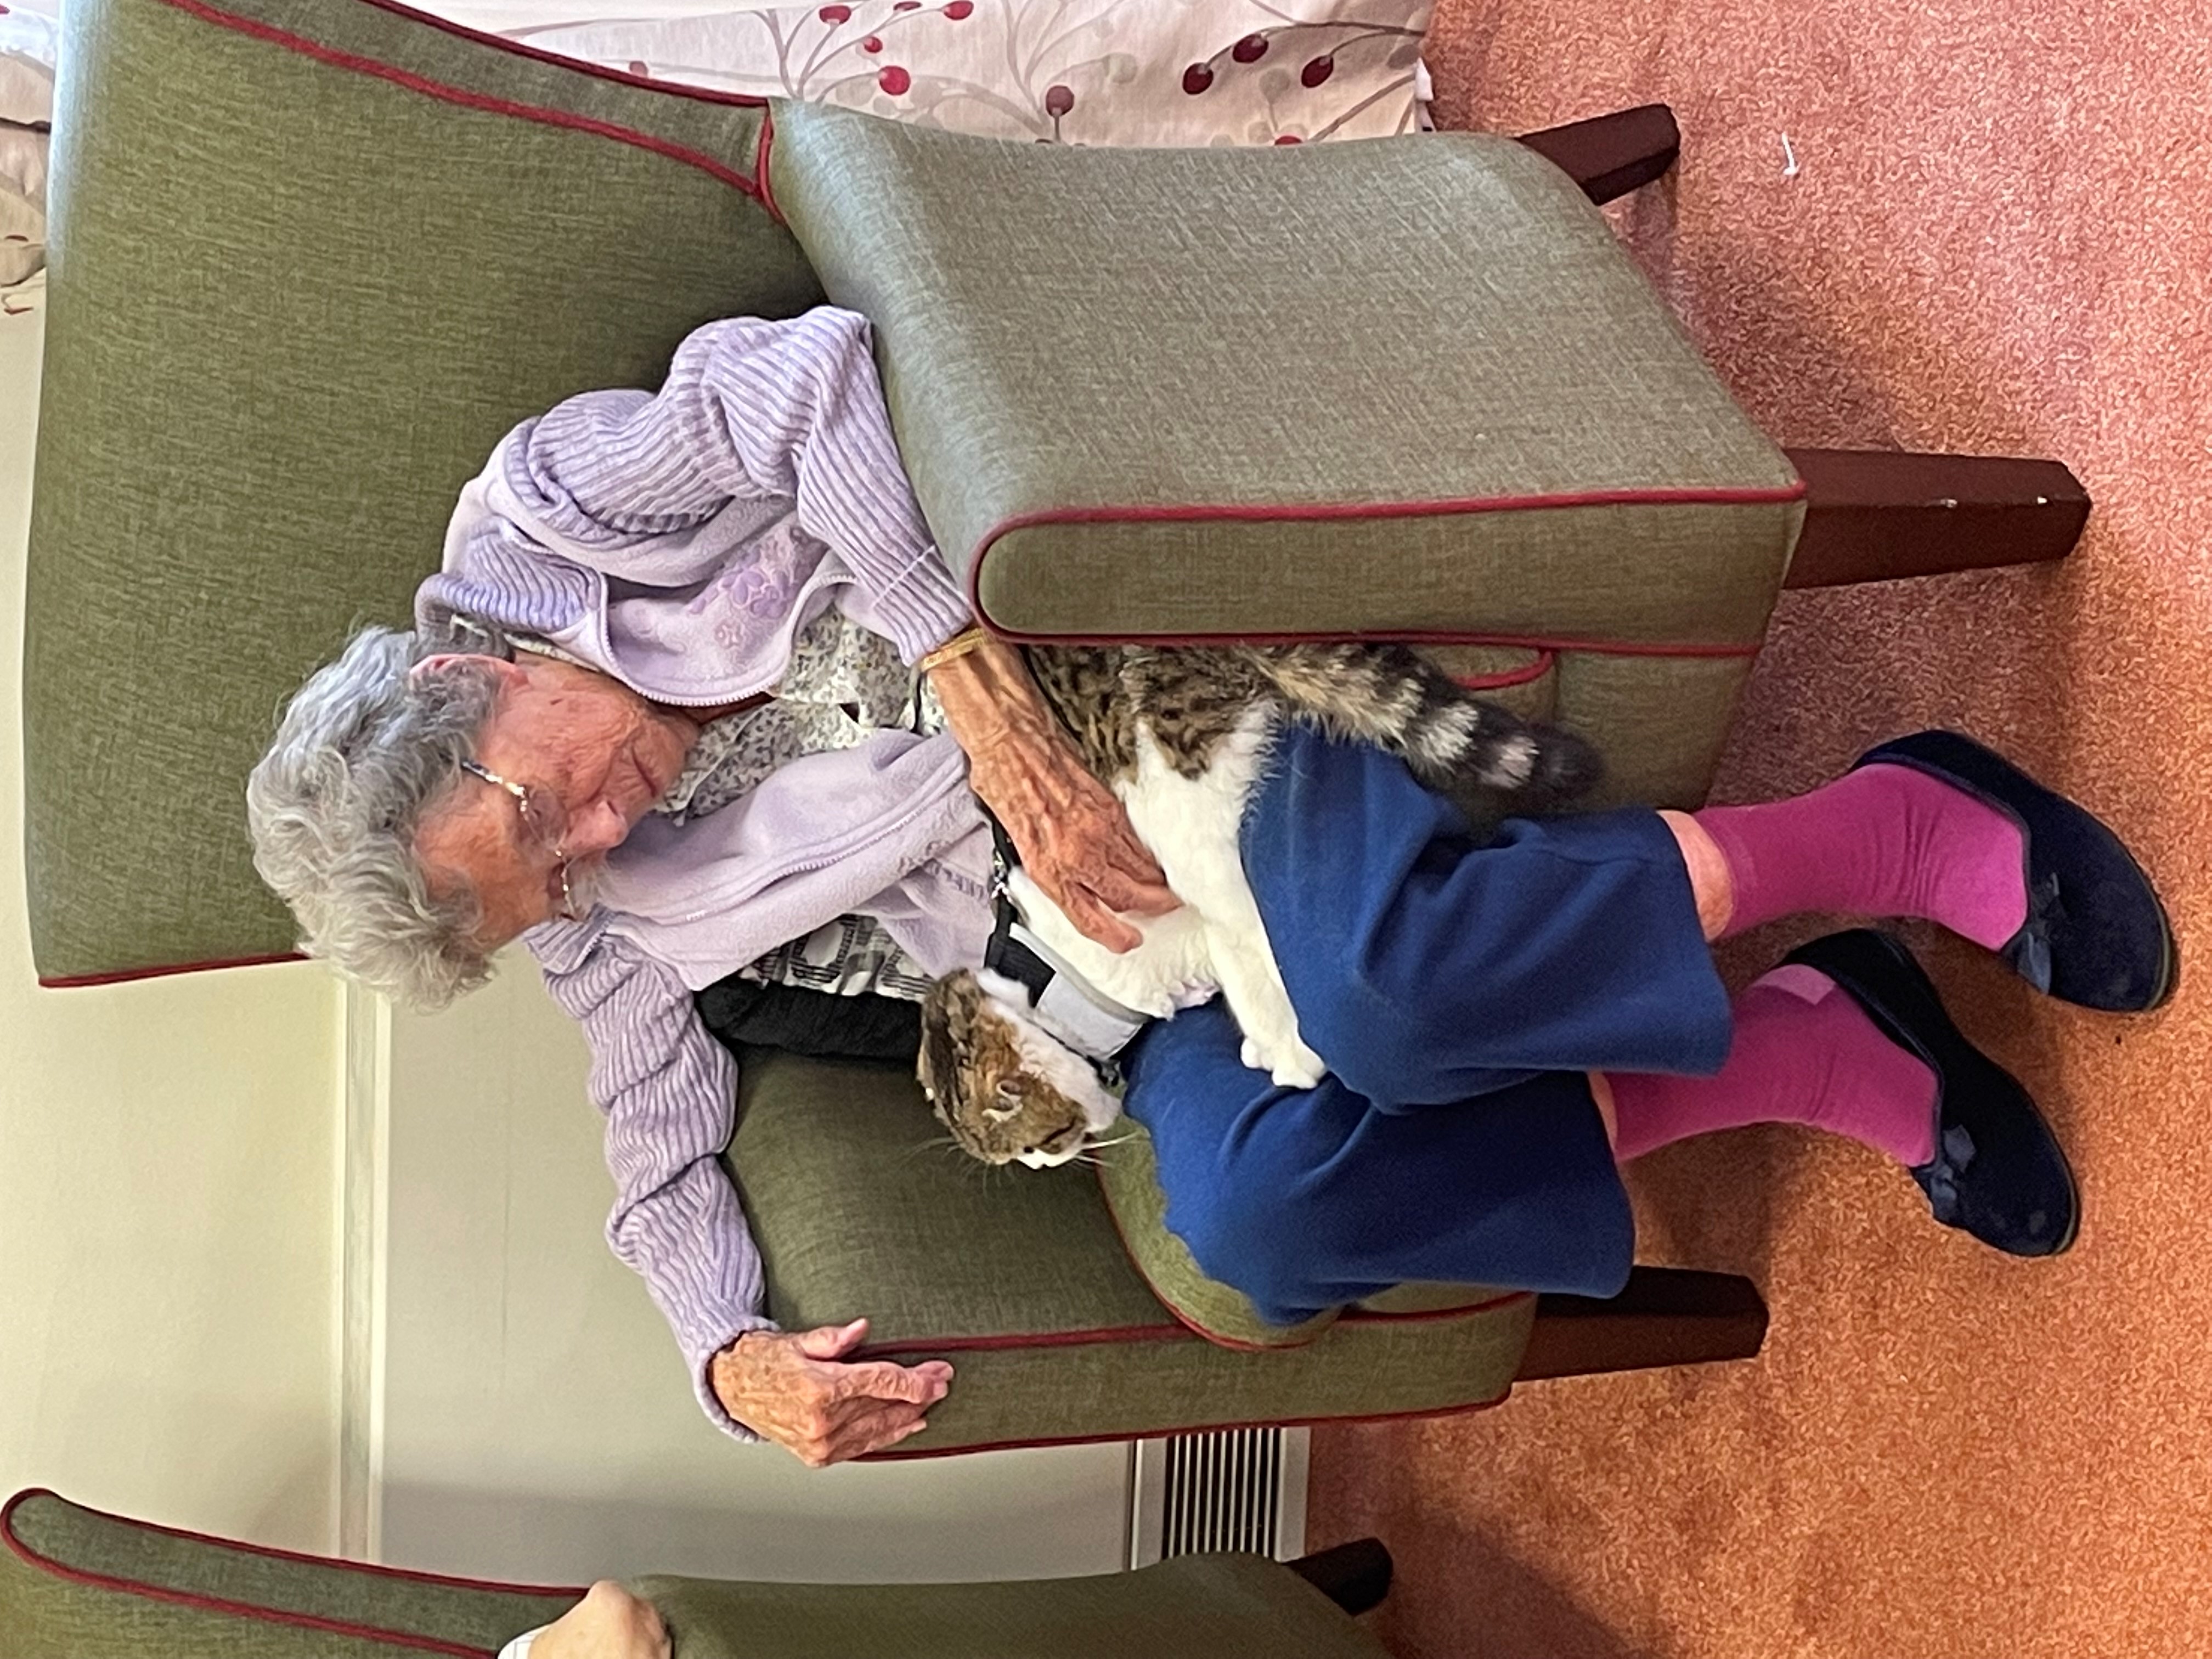 Penarth care home gets a new pet thanks to ITV show